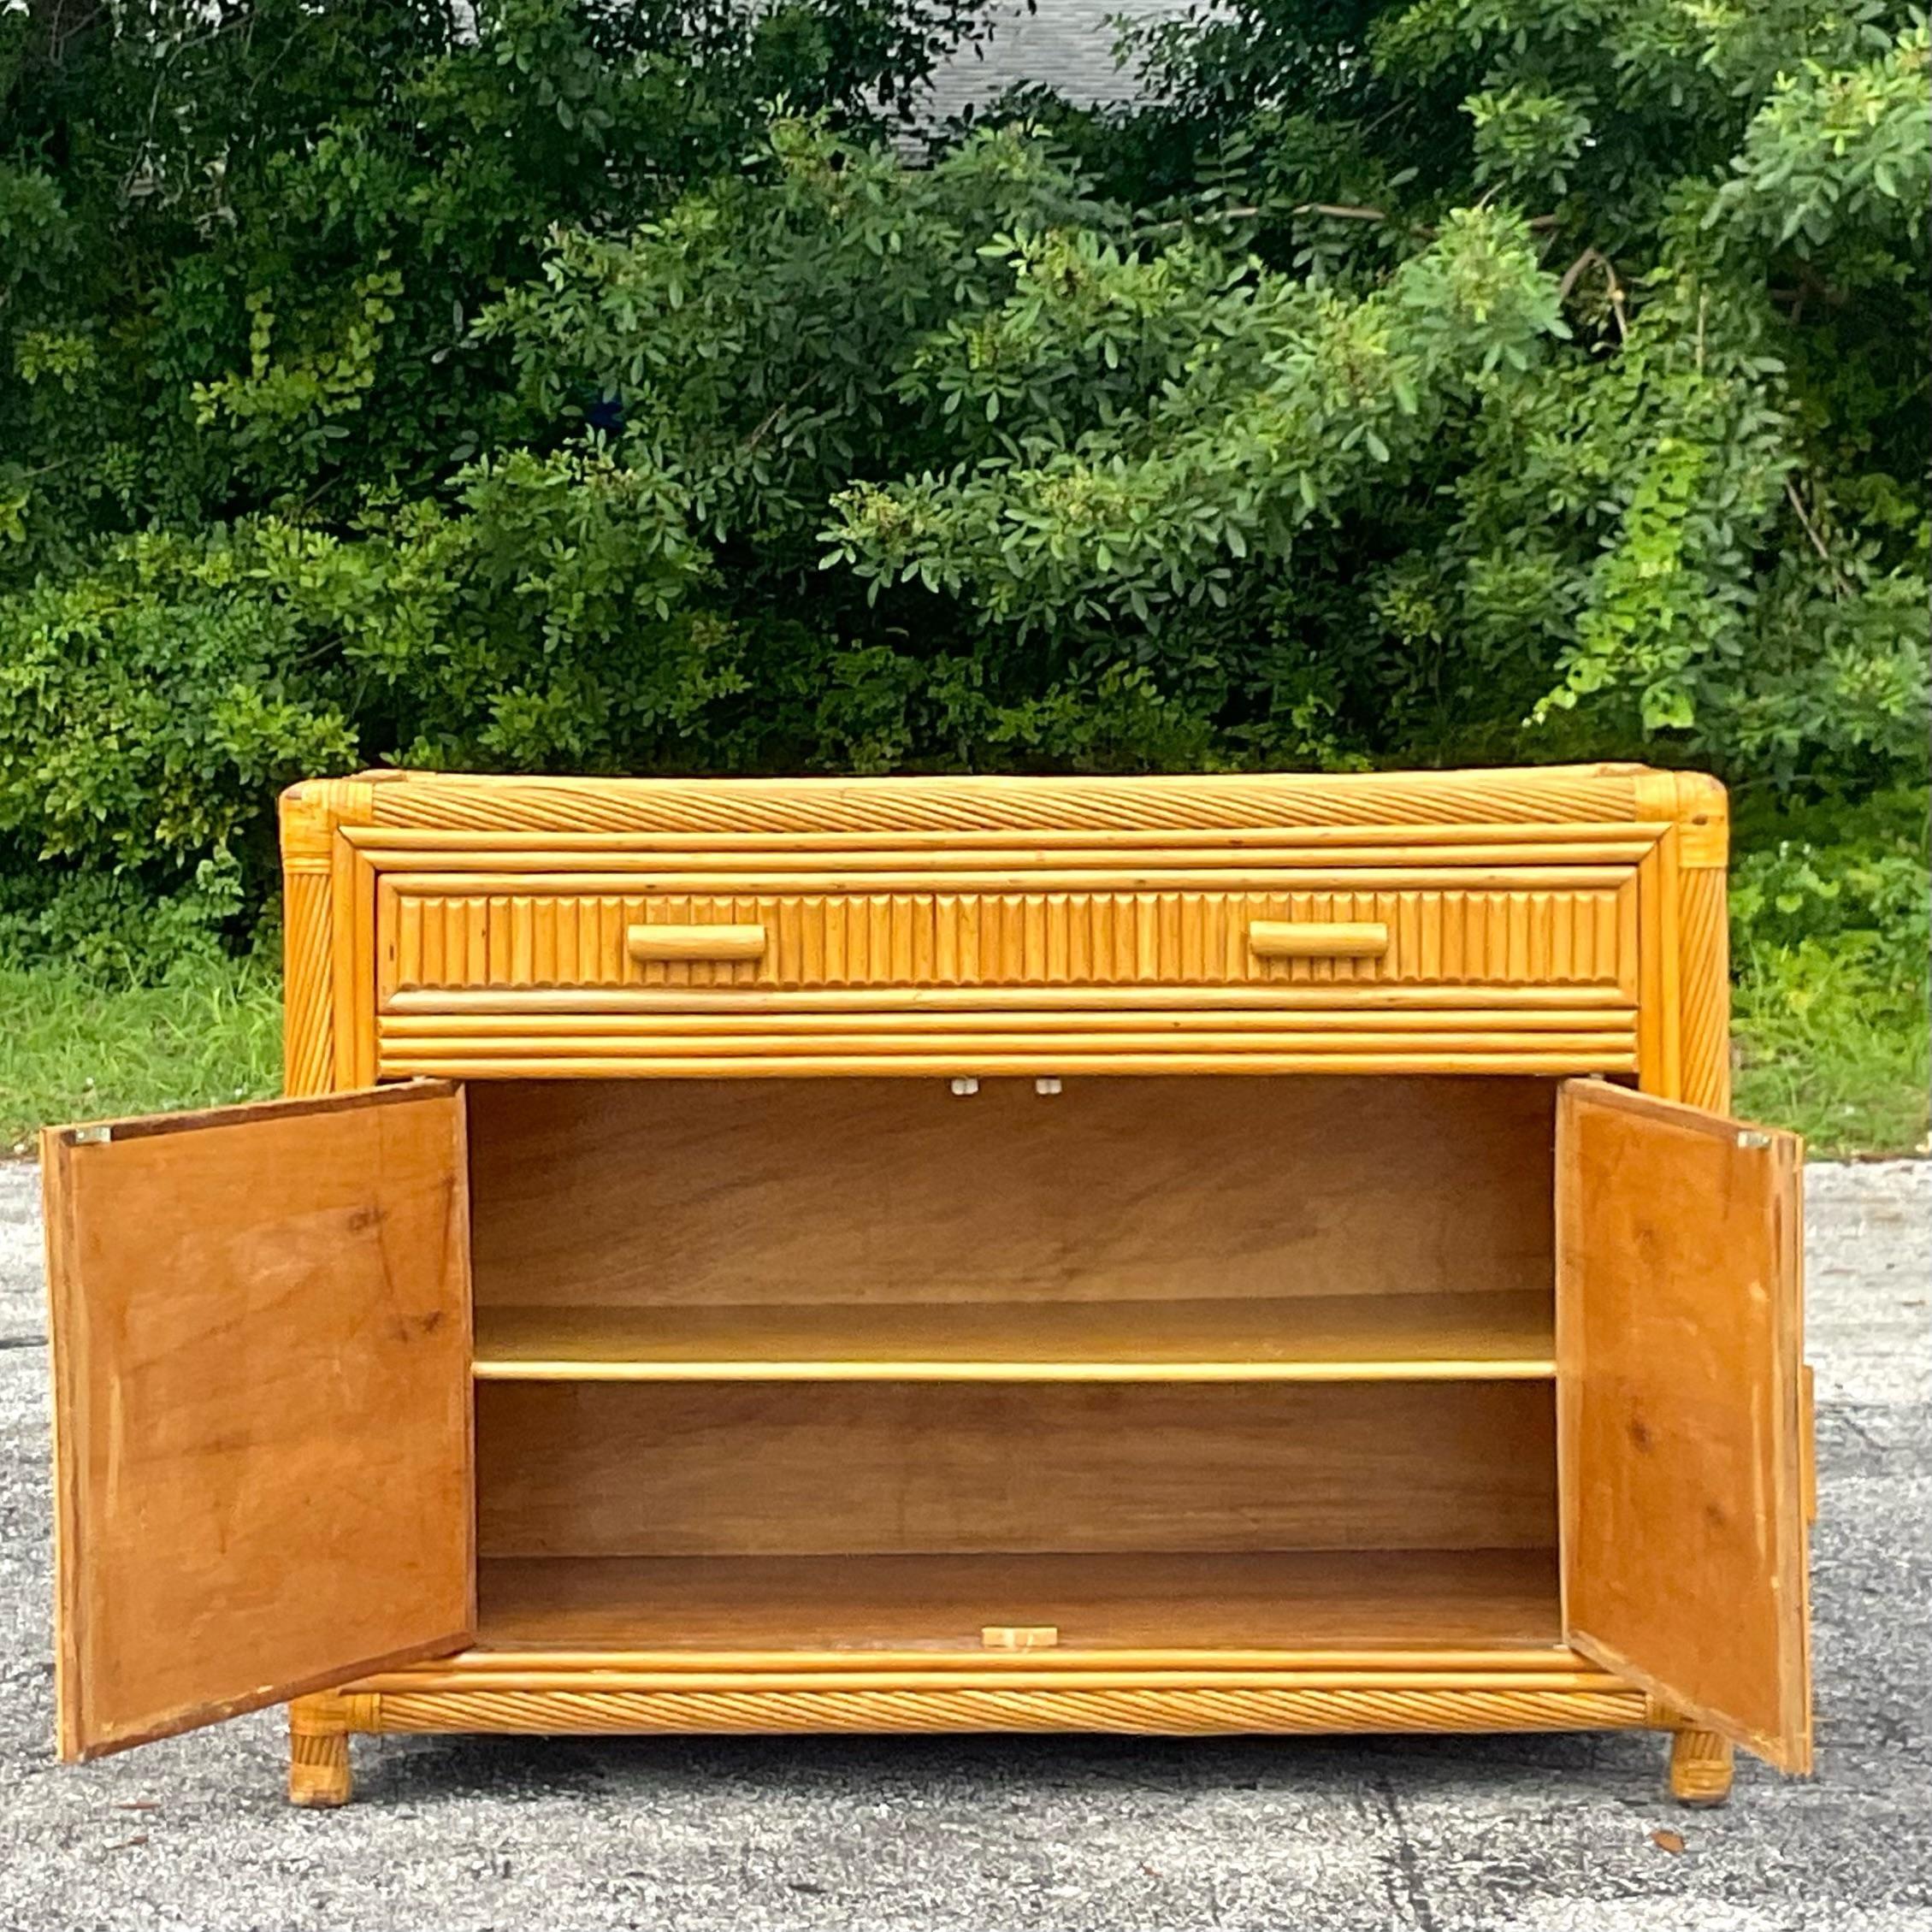 Golden gorgeous split bamboo credenza with swirl detailed trim around the edges. Add glamor and amazing storage to any space. Lots of great storage below and woven rattan on top. Acquired from a Palm Beach estate.